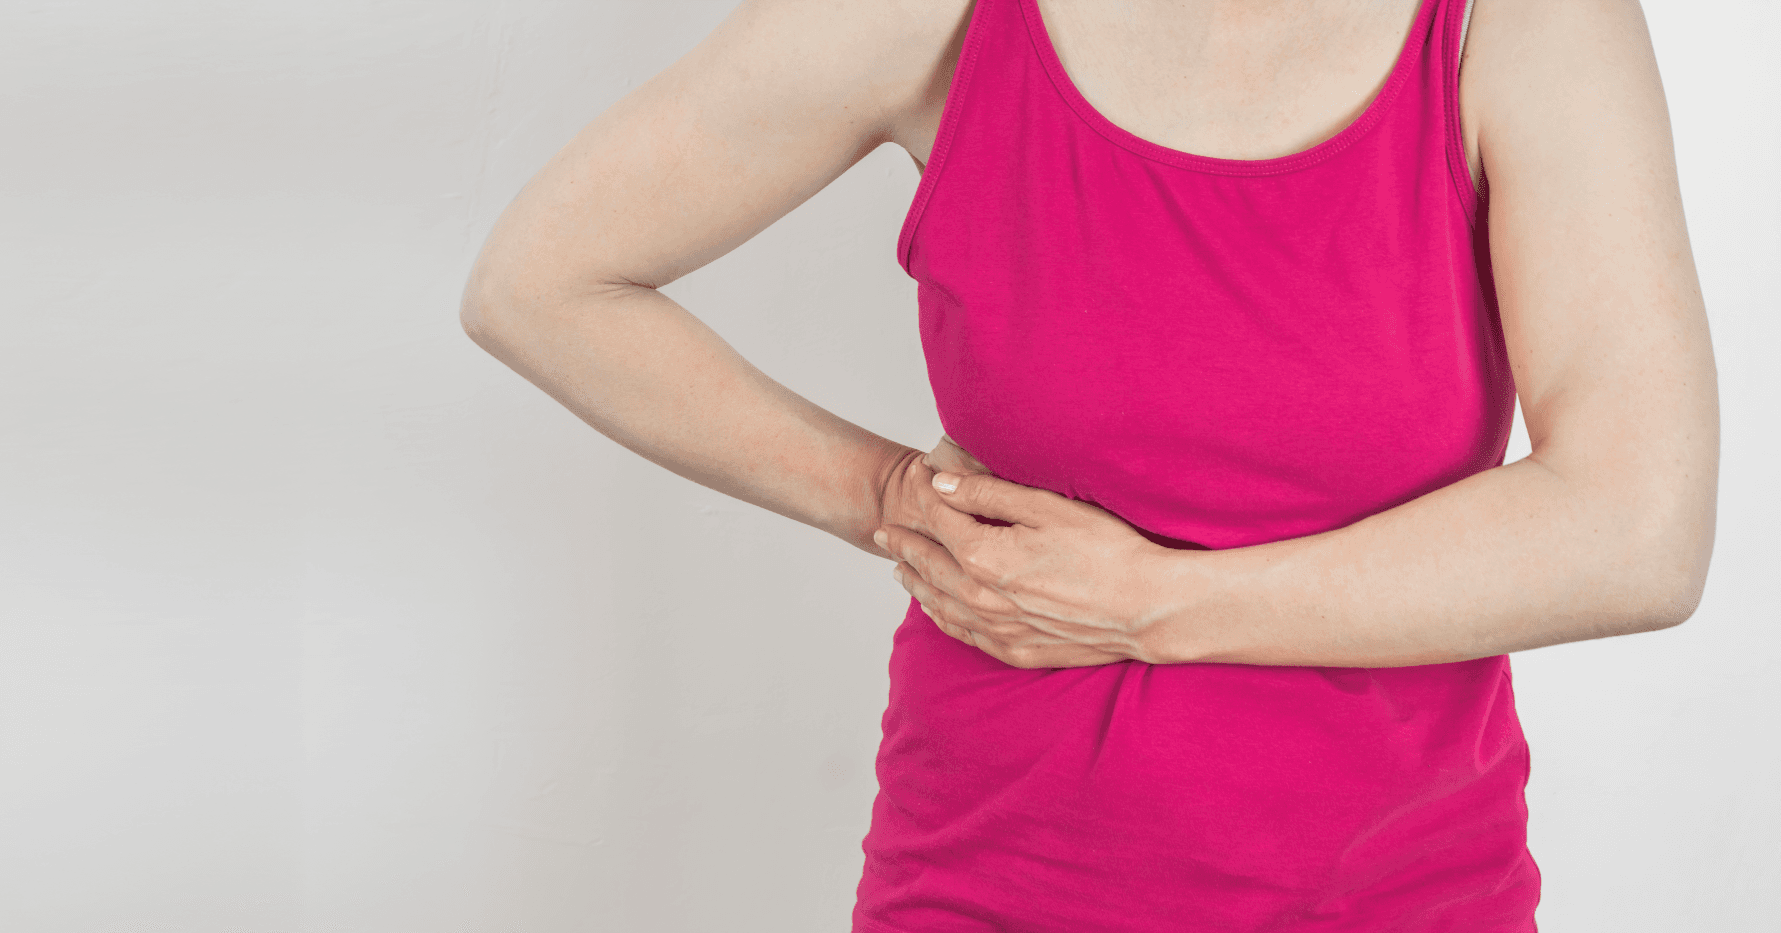 15 Ways For Kidney Stone Removal Without Surgery